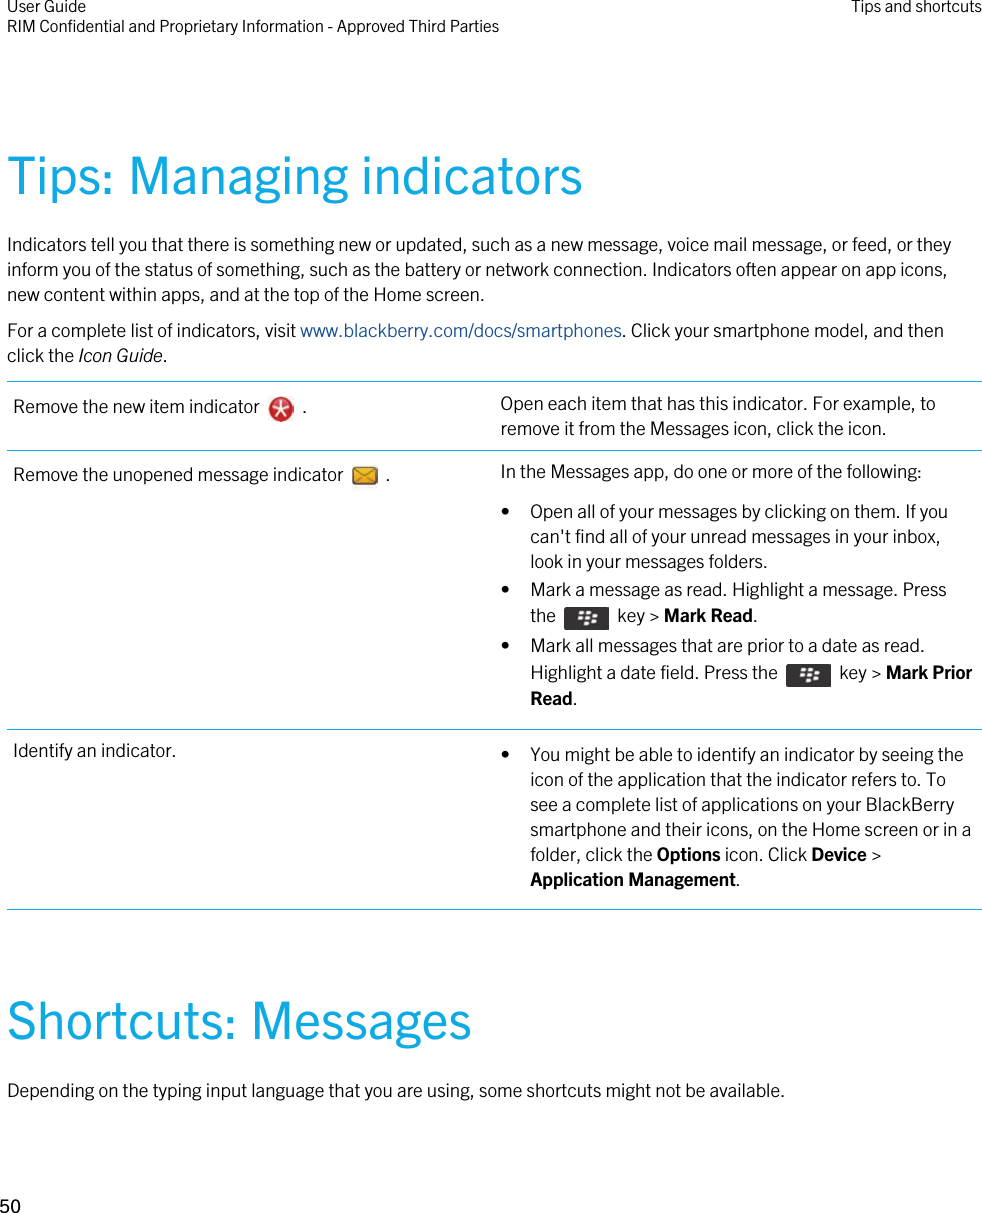 Tips: Managing indicatorsIndicators tell you that there is something new or updated, such as a new message, voice mail message, or feed, or they inform you of the status of something, such as the battery or network connection. Indicators often appear on app icons, new content within apps, and at the top of the Home screen.For a complete list of indicators, visit www.blackberry.com/docs/smartphones. Click your smartphone model, and then click the Icon Guide.Remove the new item indicator    . Open each item that has this indicator. For example, to remove it from the Messages icon, click the icon.Remove the unopened message indicator    . In the Messages app, do one or more of the following:• Open all of your messages by clicking on them. If you can&apos;t find all of your unread messages in your inbox, look in your messages folders.• Mark a message as read. Highlight a message. Press the    key &gt; Mark Read.• Mark all messages that are prior to a date as read. Highlight a date field. Press the    key &gt; Mark Prior Read.Identify an indicator. • You might be able to identify an indicator by seeing the icon of the application that the indicator refers to. To see a complete list of applications on your BlackBerry smartphone and their icons, on the Home screen or in a folder, click the Options icon. Click Device &gt; Application Management.Shortcuts: MessagesDepending on the typing input language that you are using, some shortcuts might not be available.User GuideRIM Confidential and Proprietary Information - Approved Third Parties Tips and shortcuts50 